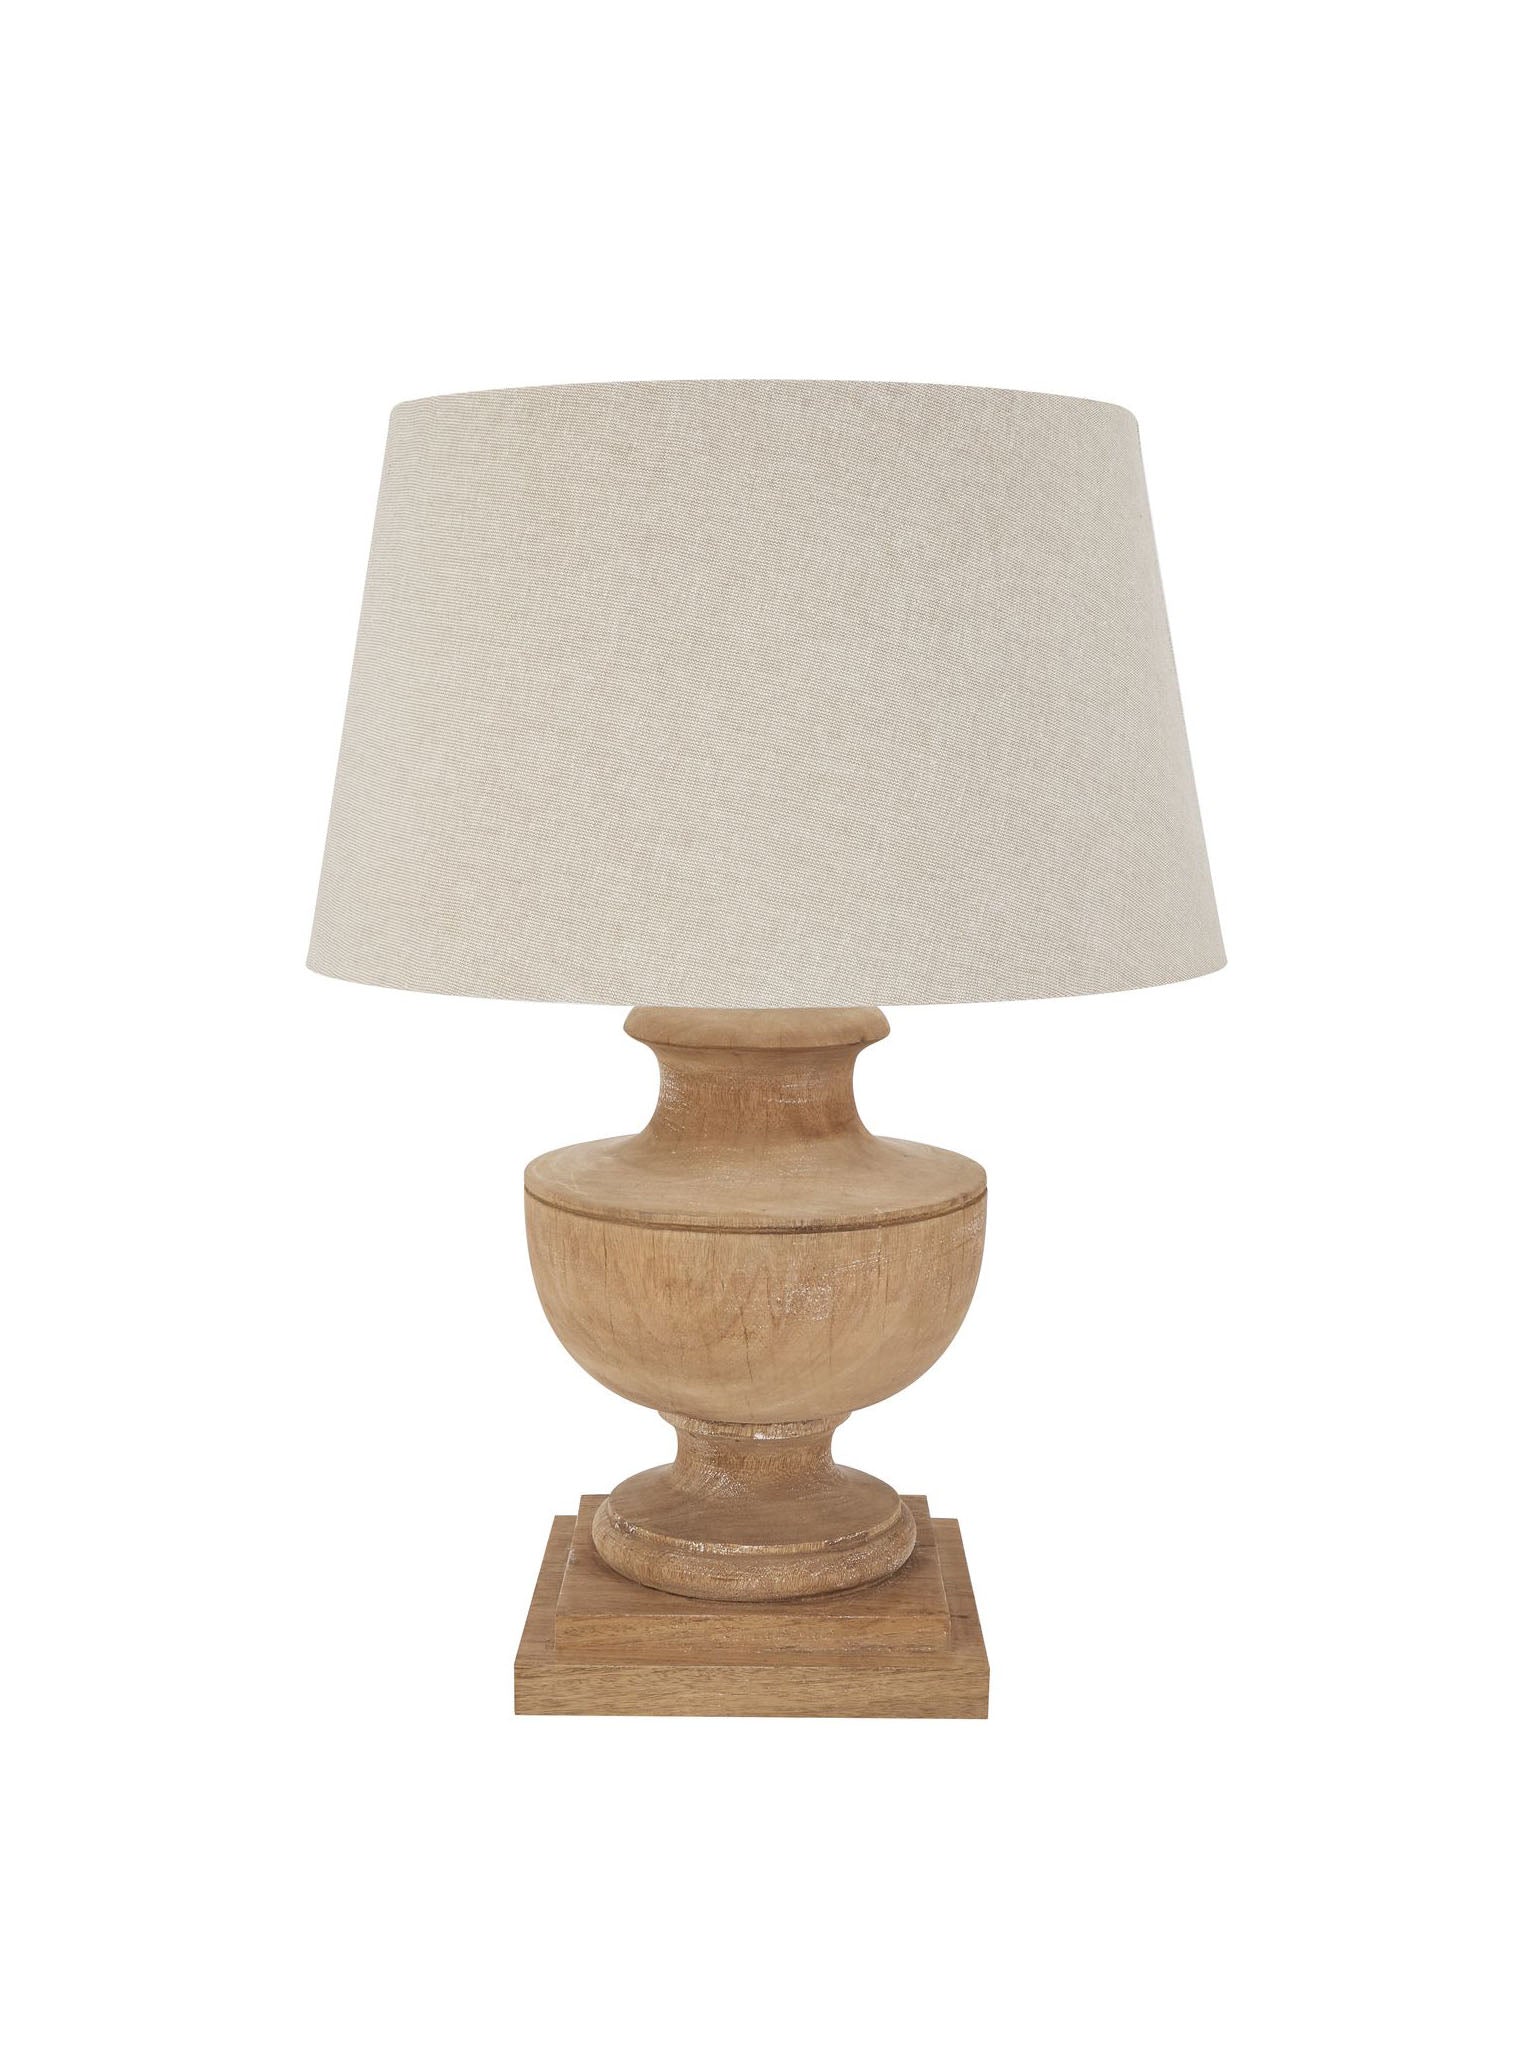 wooden turned lamp with pale linen shade